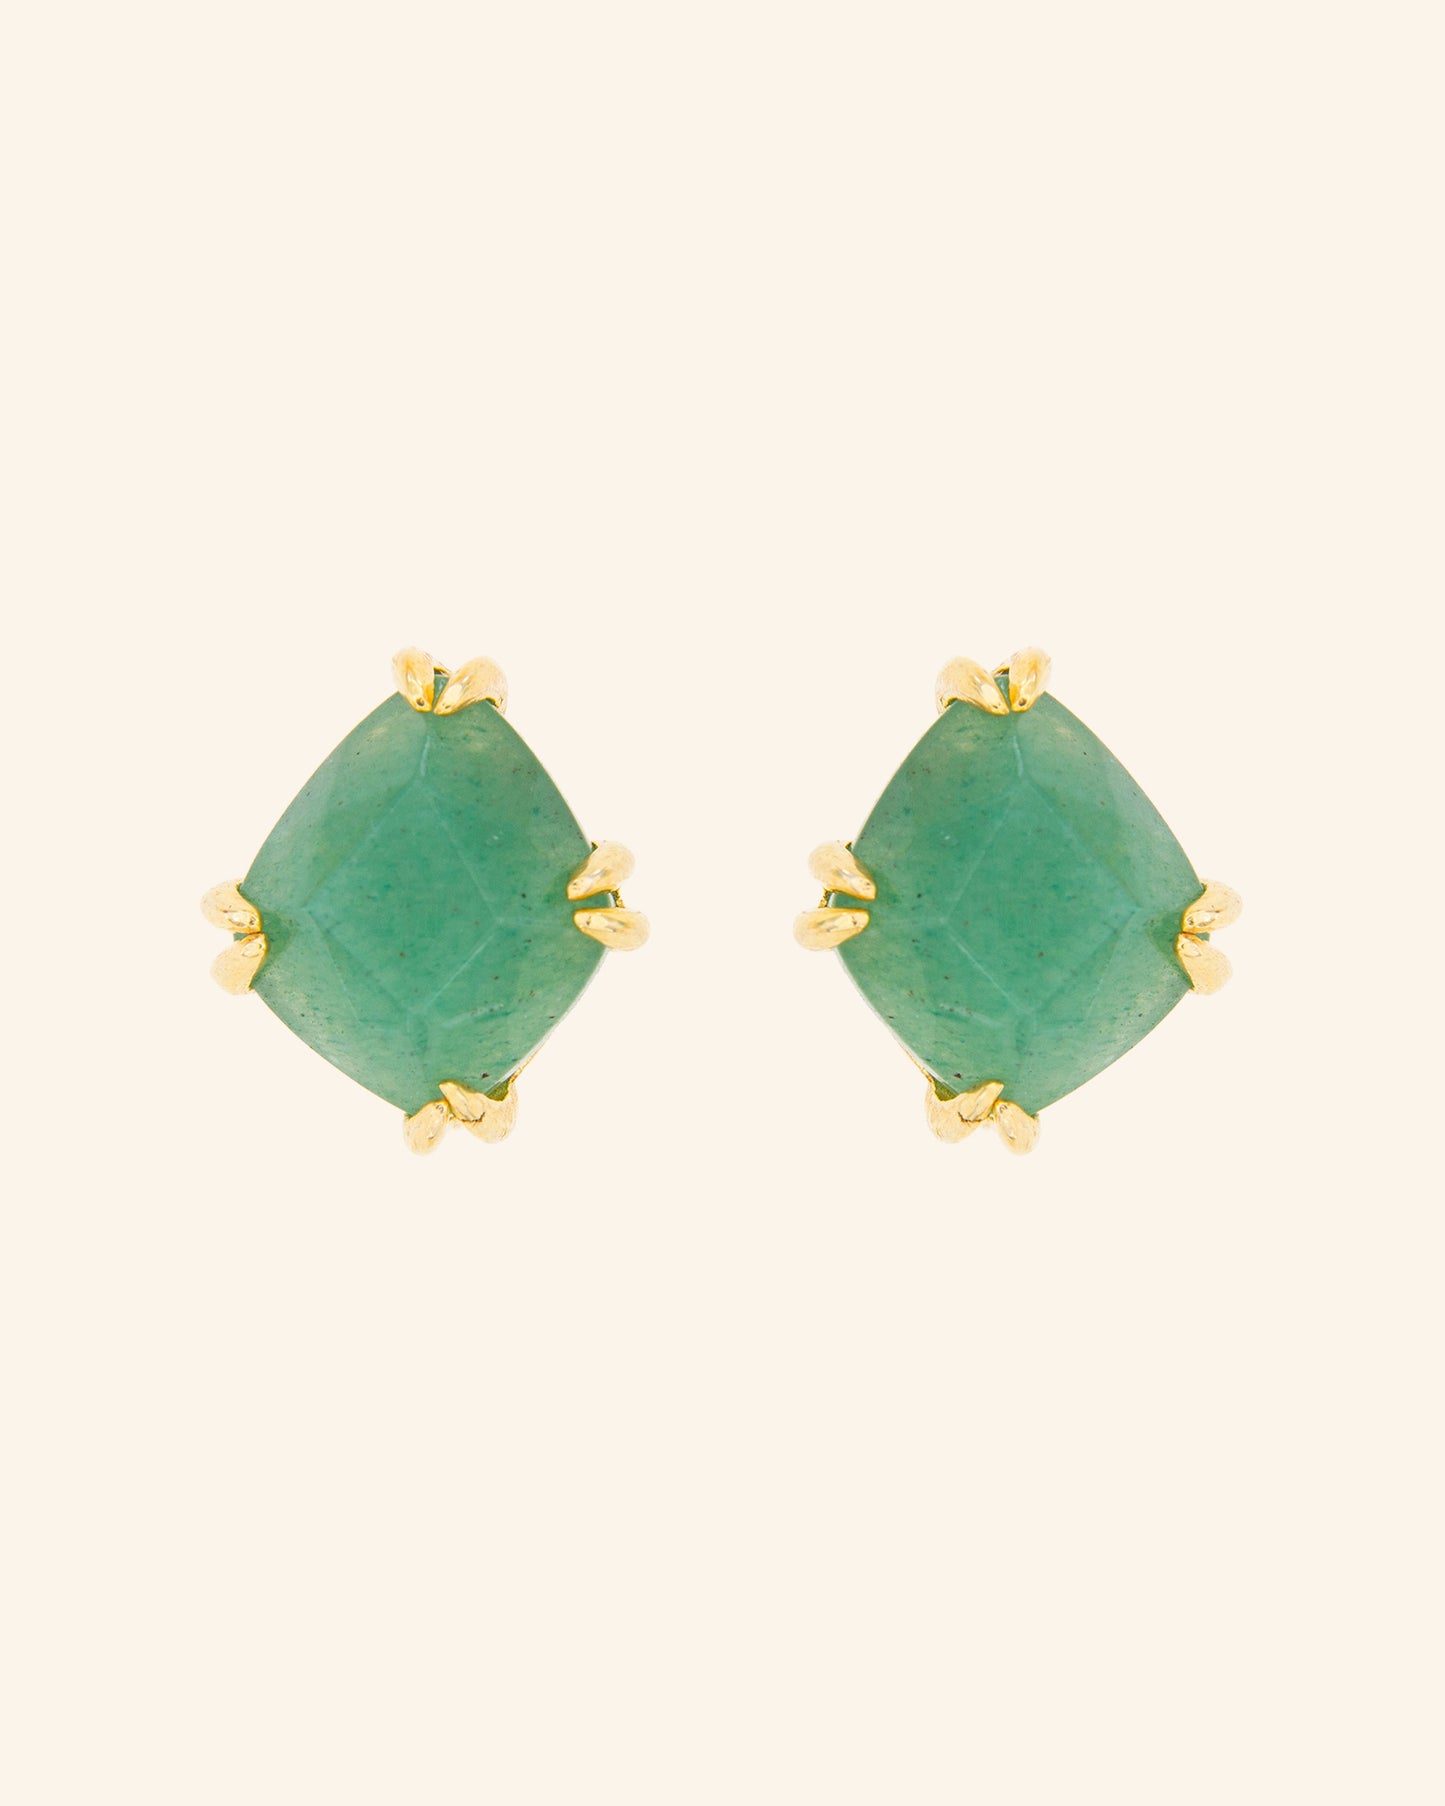 Candy Tail earrings with aventurine